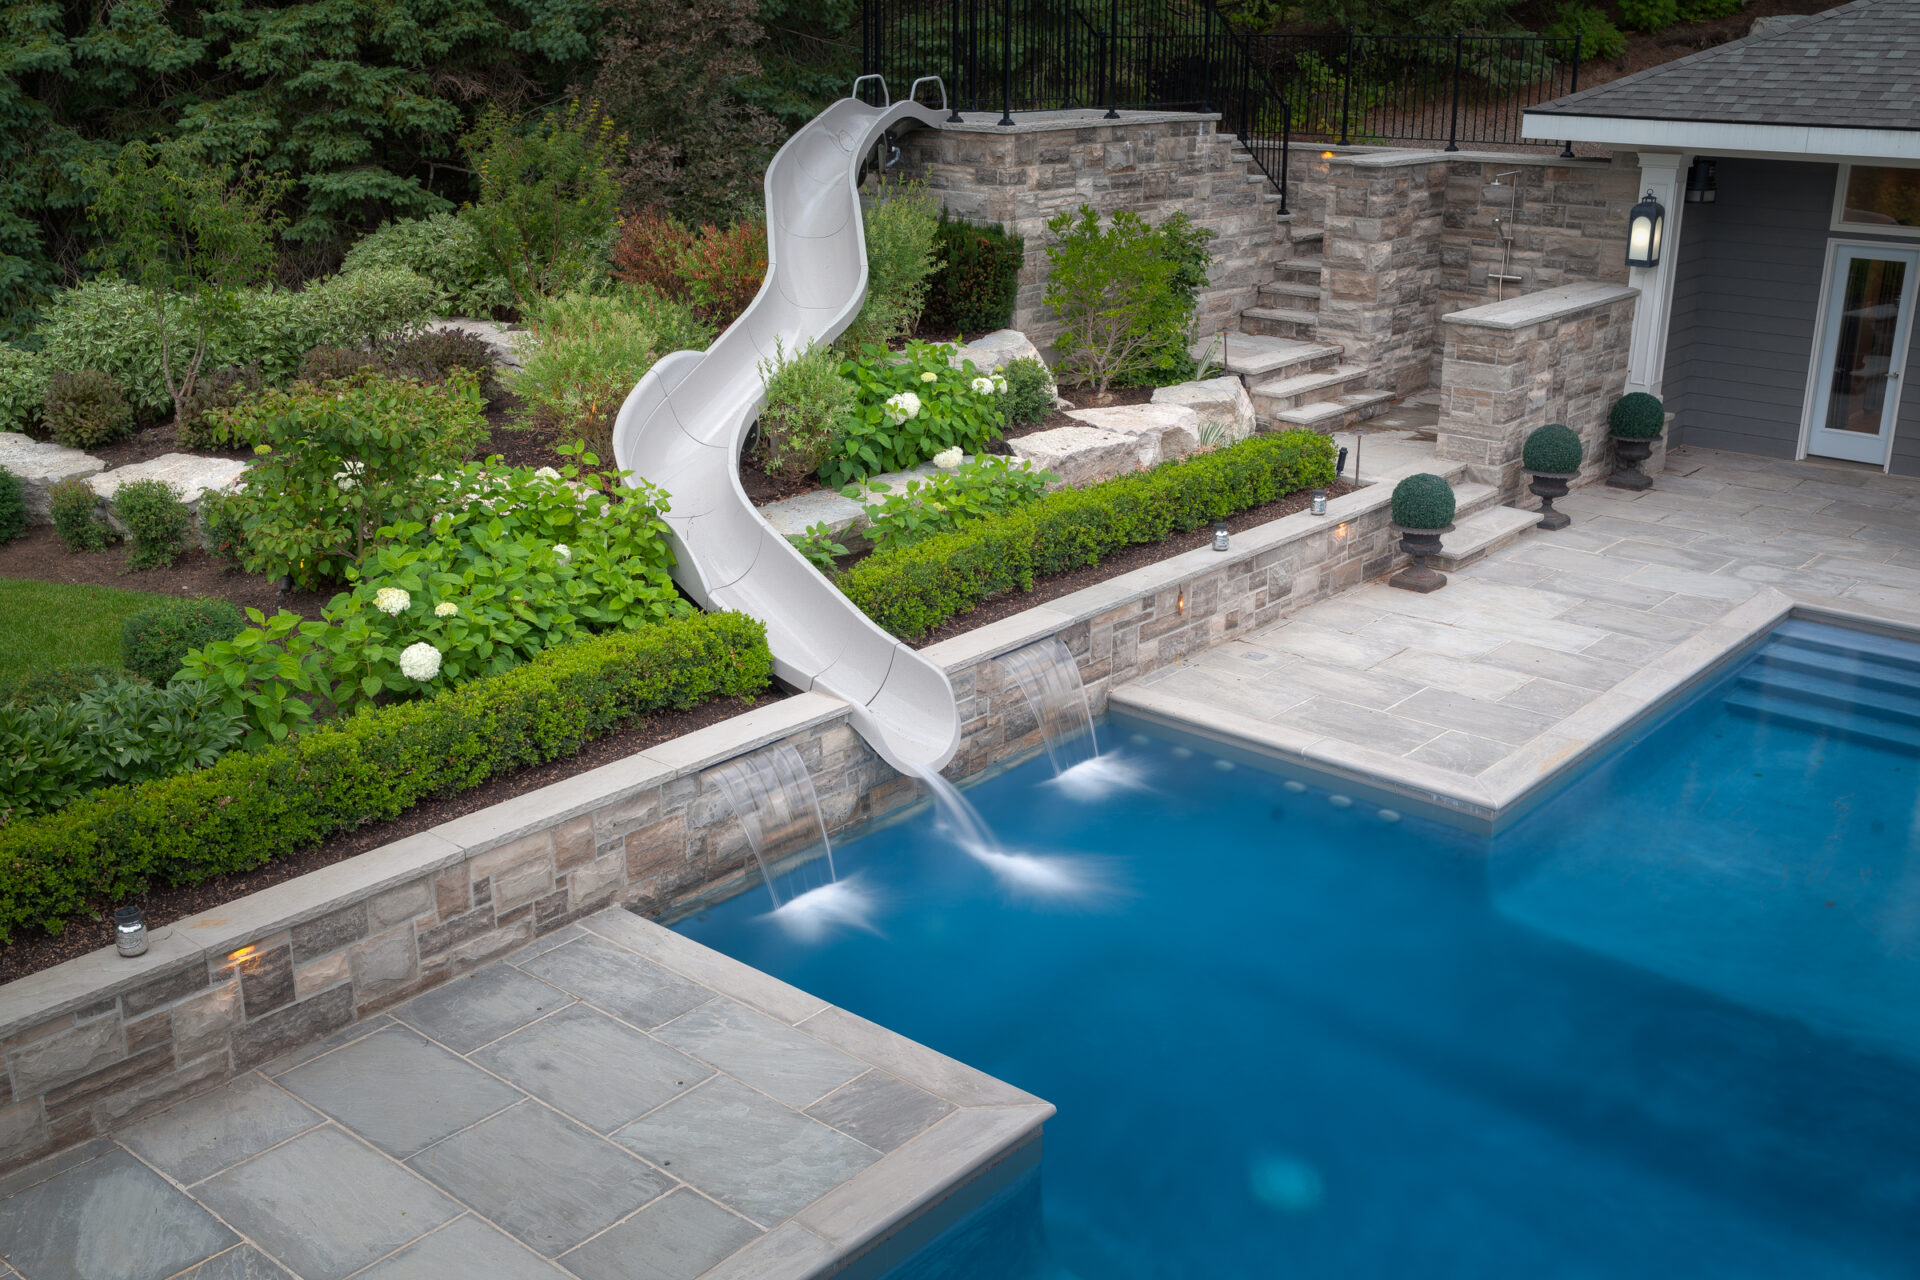 A backyard with an inground swimming pool and a twisting slide, surrounded by a landscaped garden and a stone patio on an overcast day.